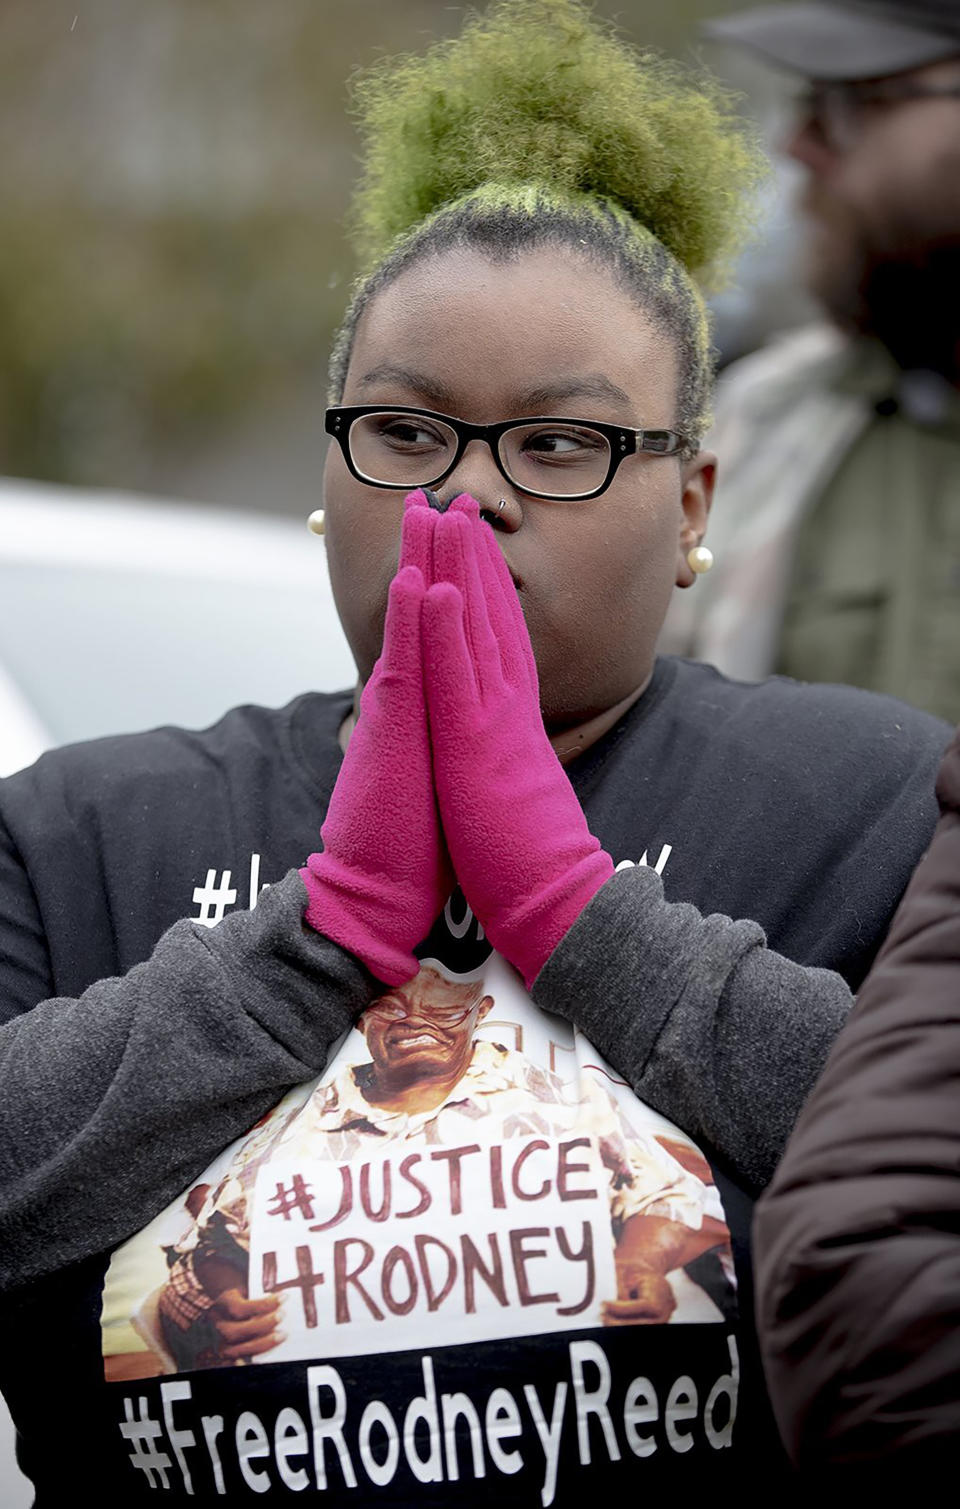 Lakendria Martin listens to a speaker during a protest against the execution of Rodney Reed on Wednesday, Nov. 13, 2019, in Bastrop, Texas. Protesters rallied in support of Reed’s campaign to stop his scheduled Nov. 20 execution for the 1996 killing of a 19-year-old Stacy Stites. New evidence in the case has led a growing number of Texas legislators, religious leaders and celebrities to press Gov. Greg Abbott to intervene. (Nick Wagner/Austin American-Statesman via AP)